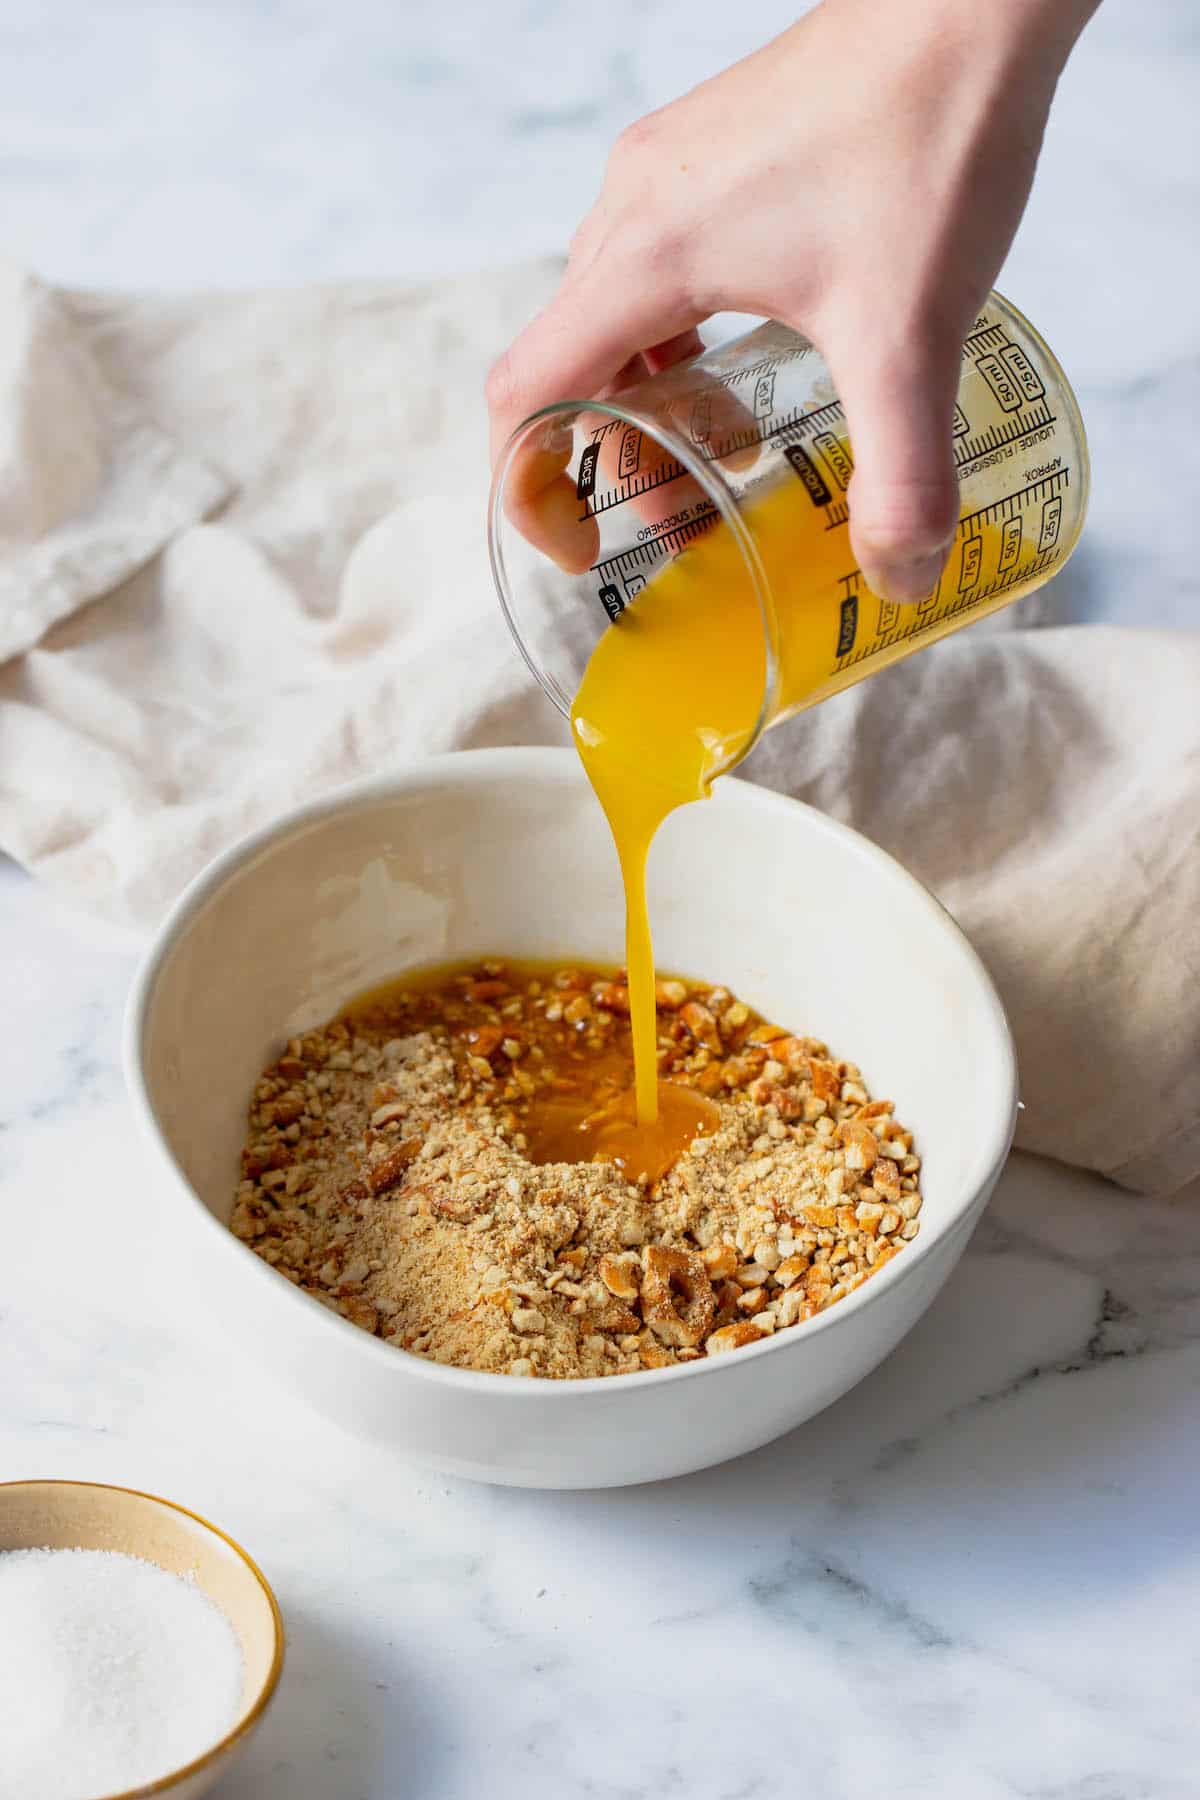 Melted butter being poured over pretzel crumbs